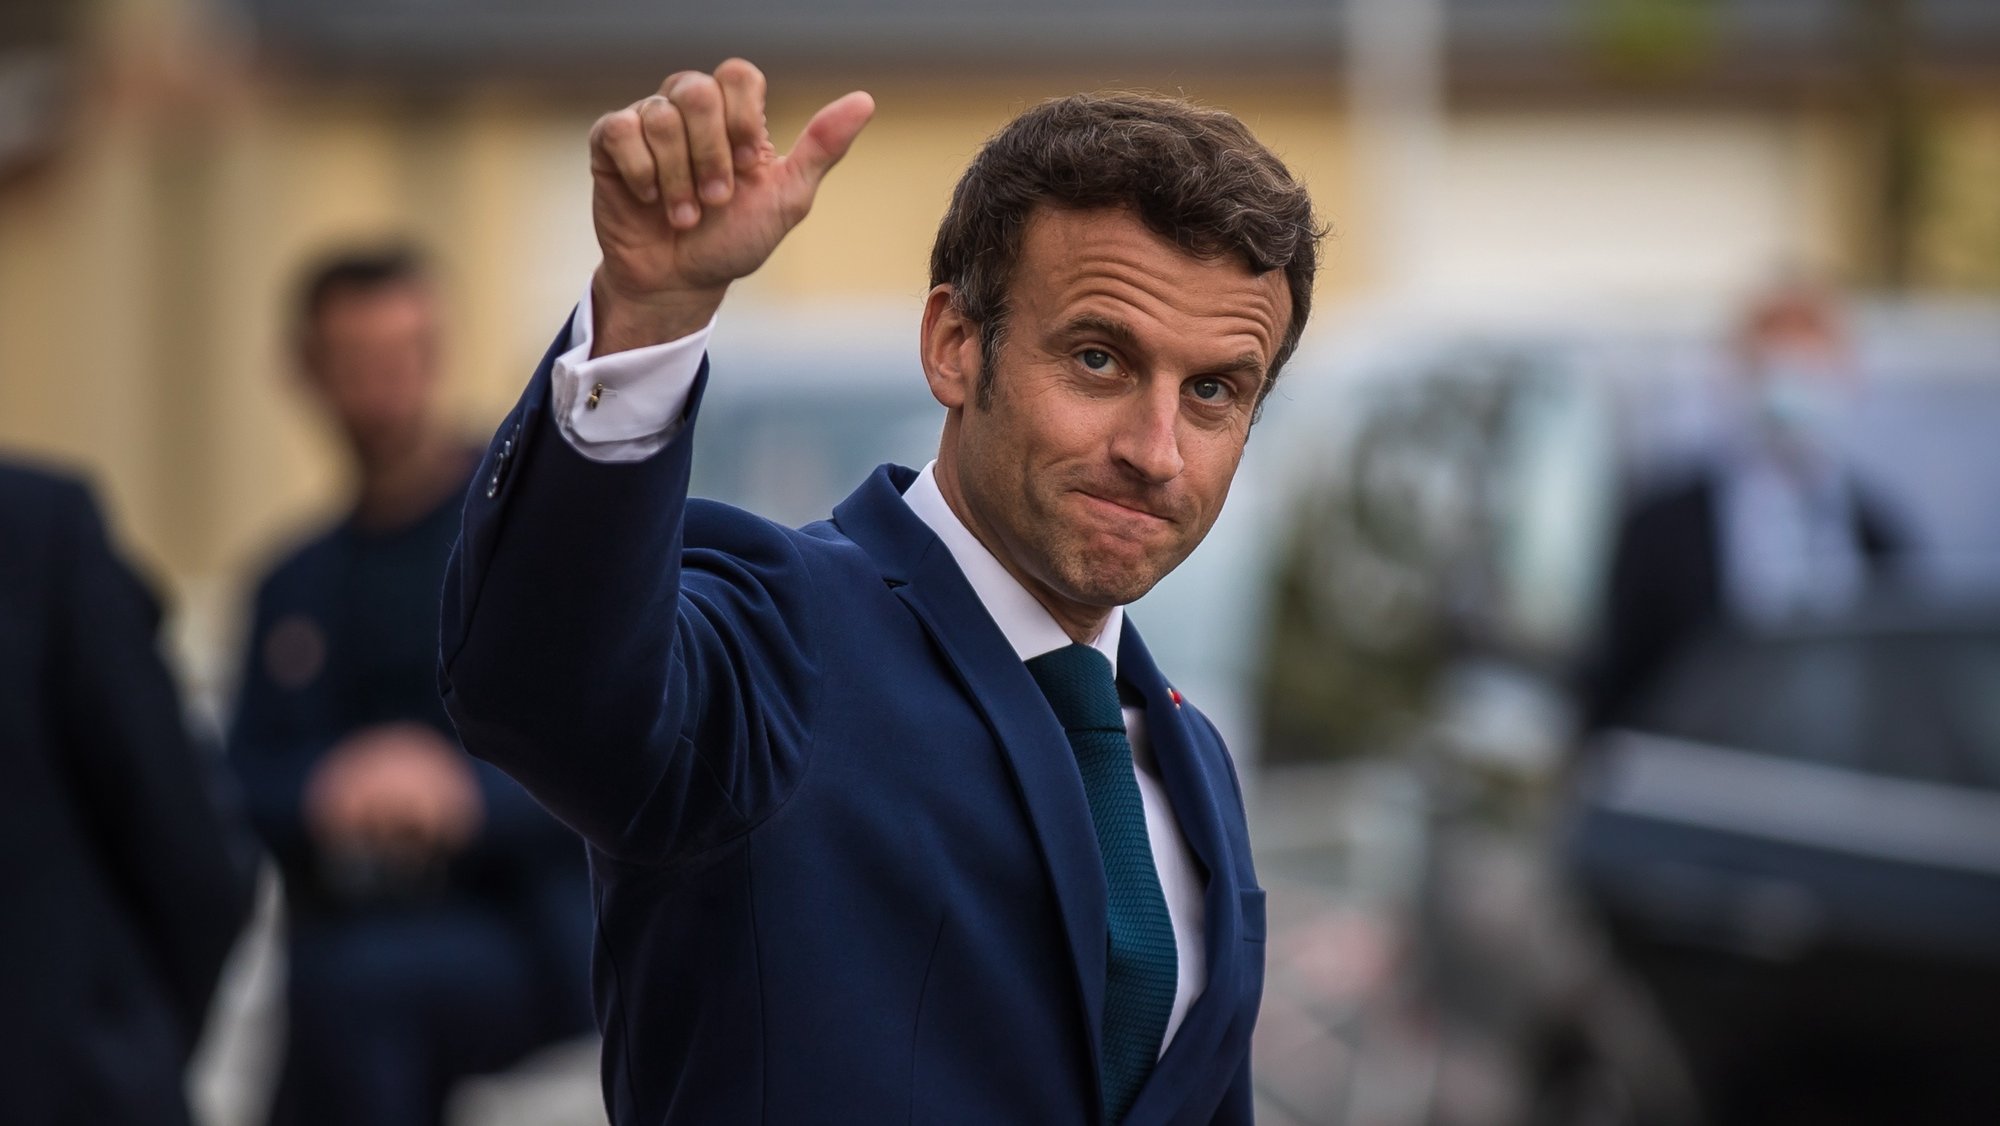 epa09914841 French President Emmanuel Macron waves as he leaves after his visit at the &#039;Percy&#039; Army Hospital in Clamart, near Paris, France, 28 April 2022. Macron met soldiers injured during external operations, and caregivers of the Percy Army Hospital.  EPA/CHRISTOPHE PETIT TESSON / POOL